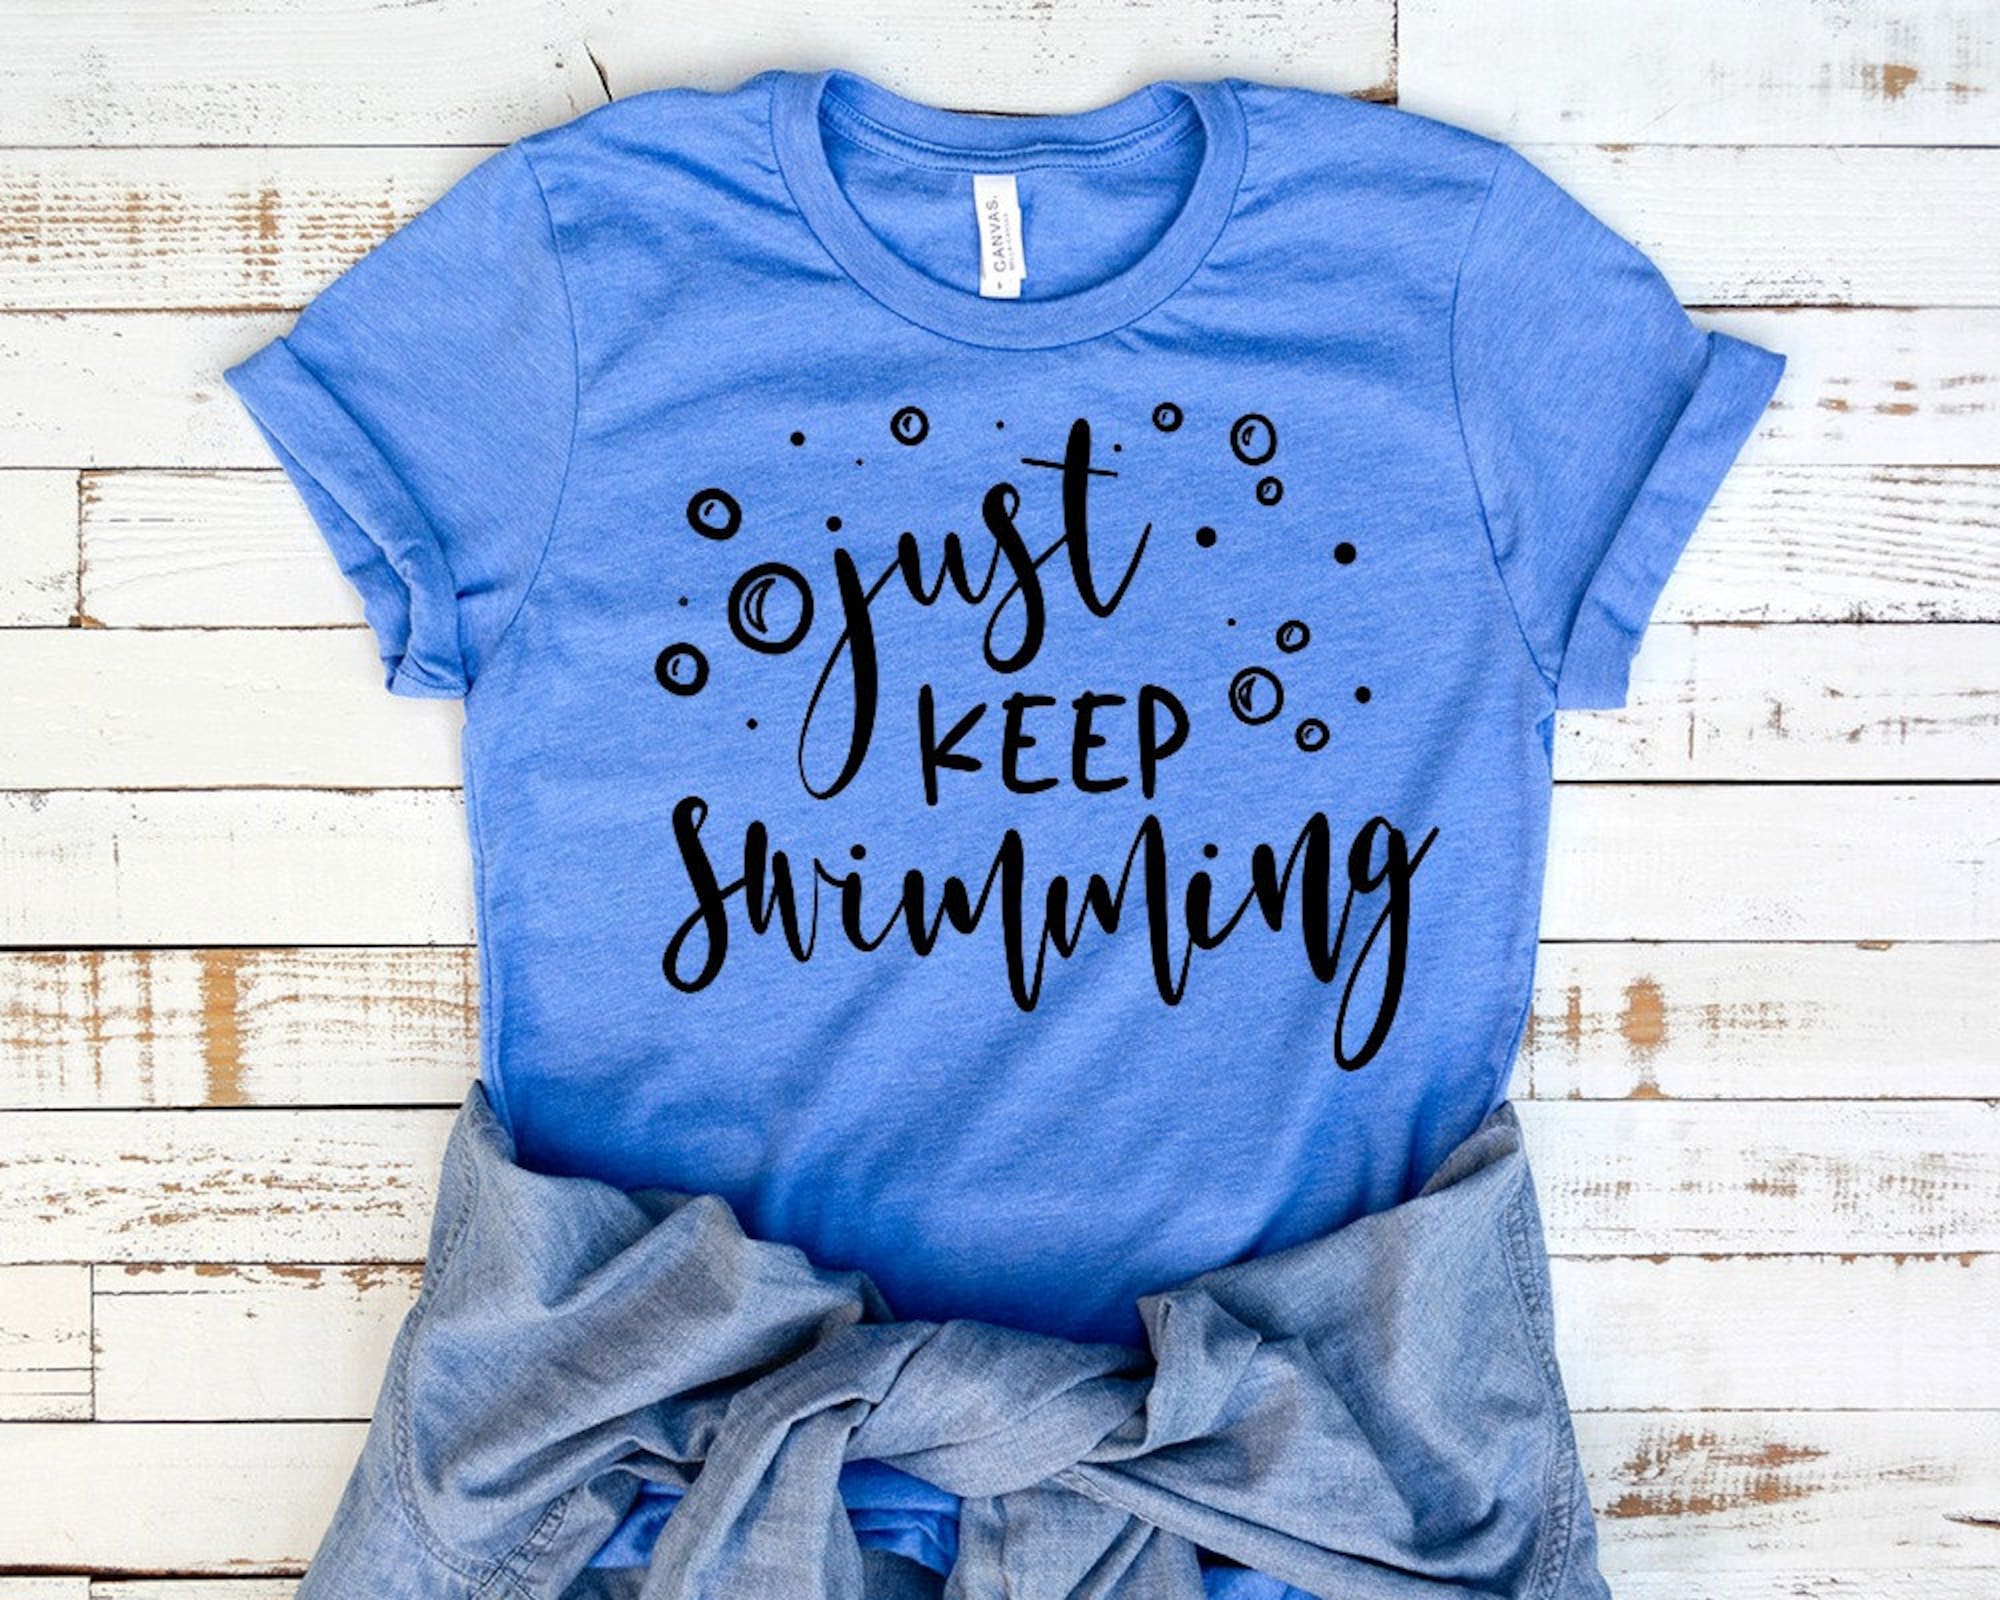 Discover Just keep swimming shirt, Finding Nemo tee